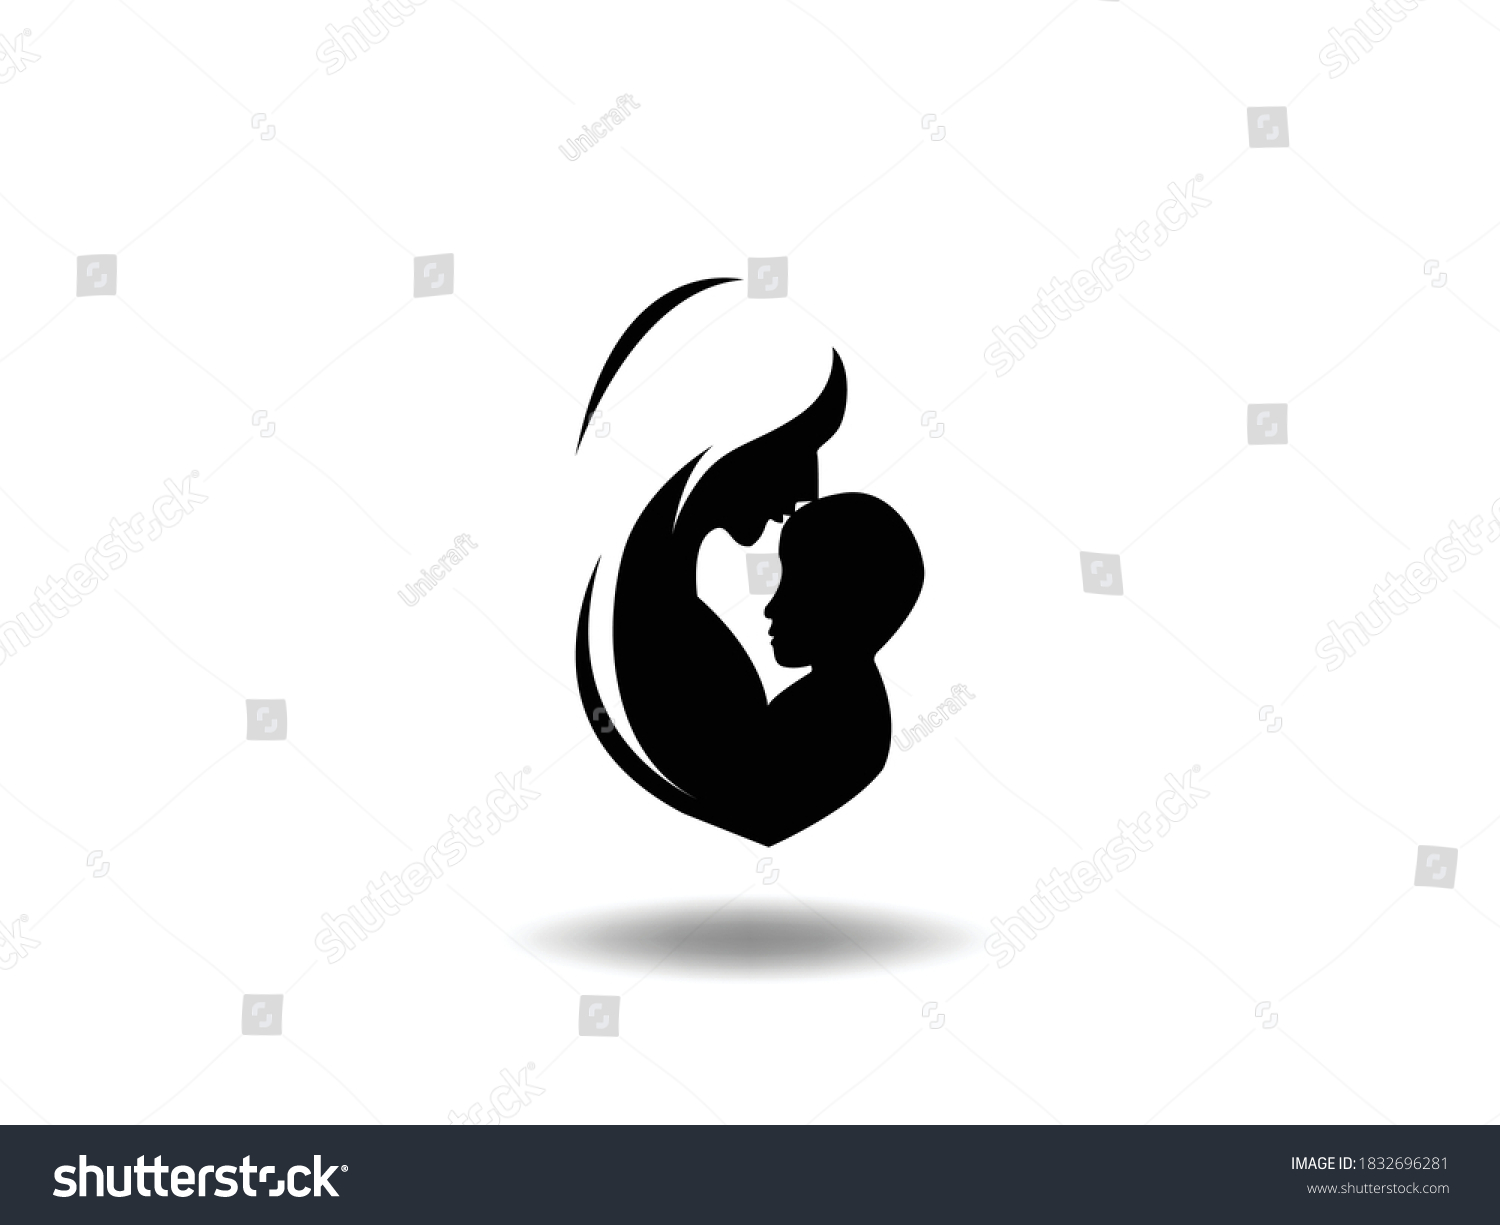 SVG of Mother Icon Vector illustration. mom and baby symbol. mother and baby silhouette, Medicine Clinic sign isolated on white background with shadow, Flat style for graphic and web design, logo. svg cut svg